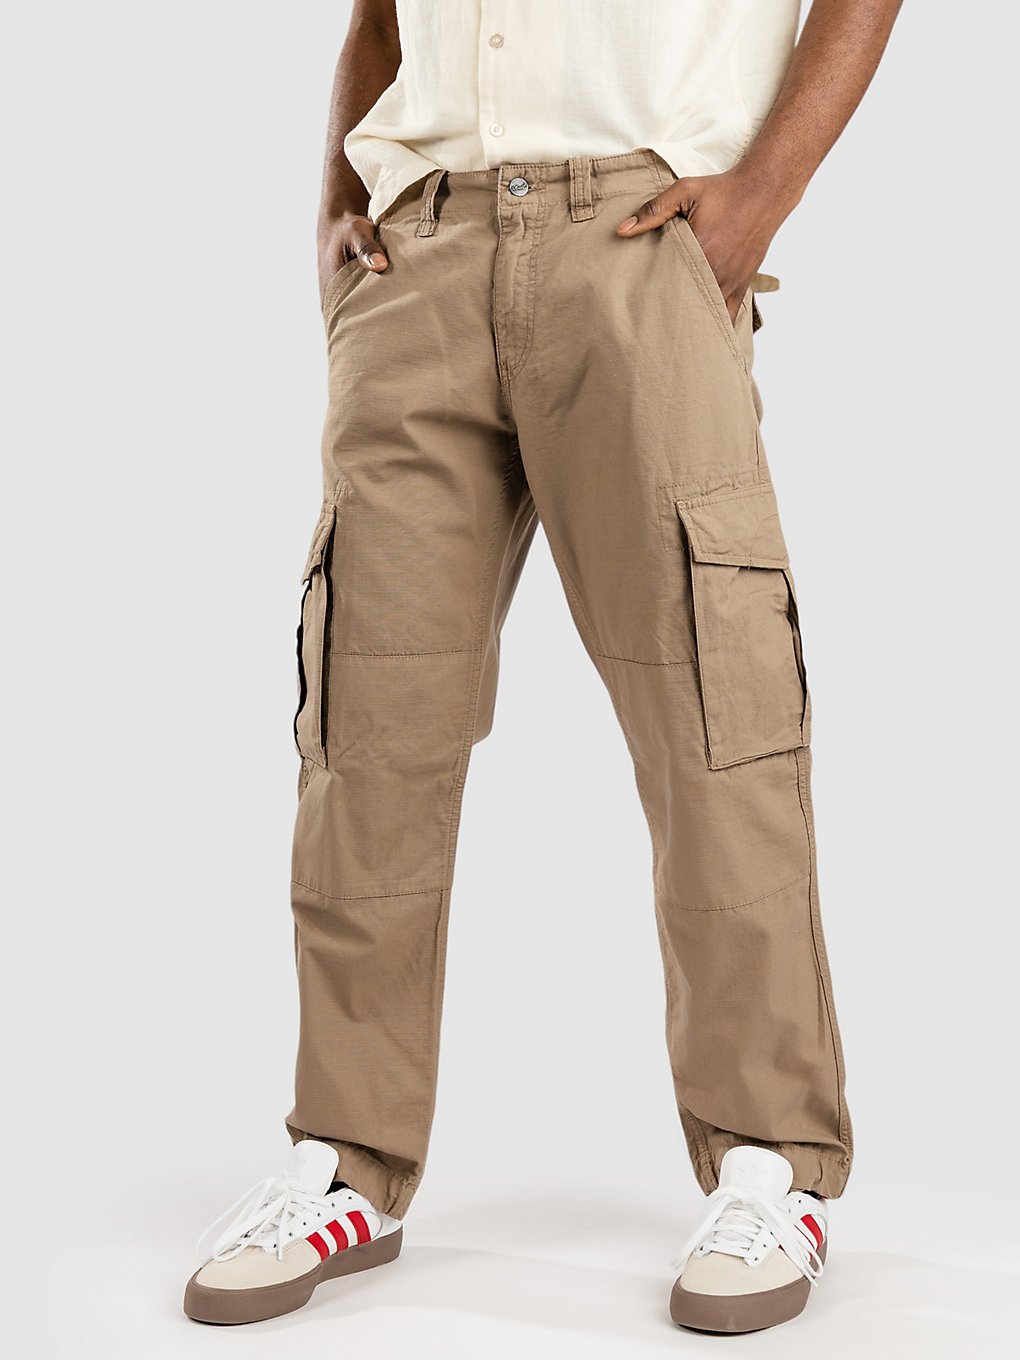 REELL Cargo Ripstop Hose taupe kaufen